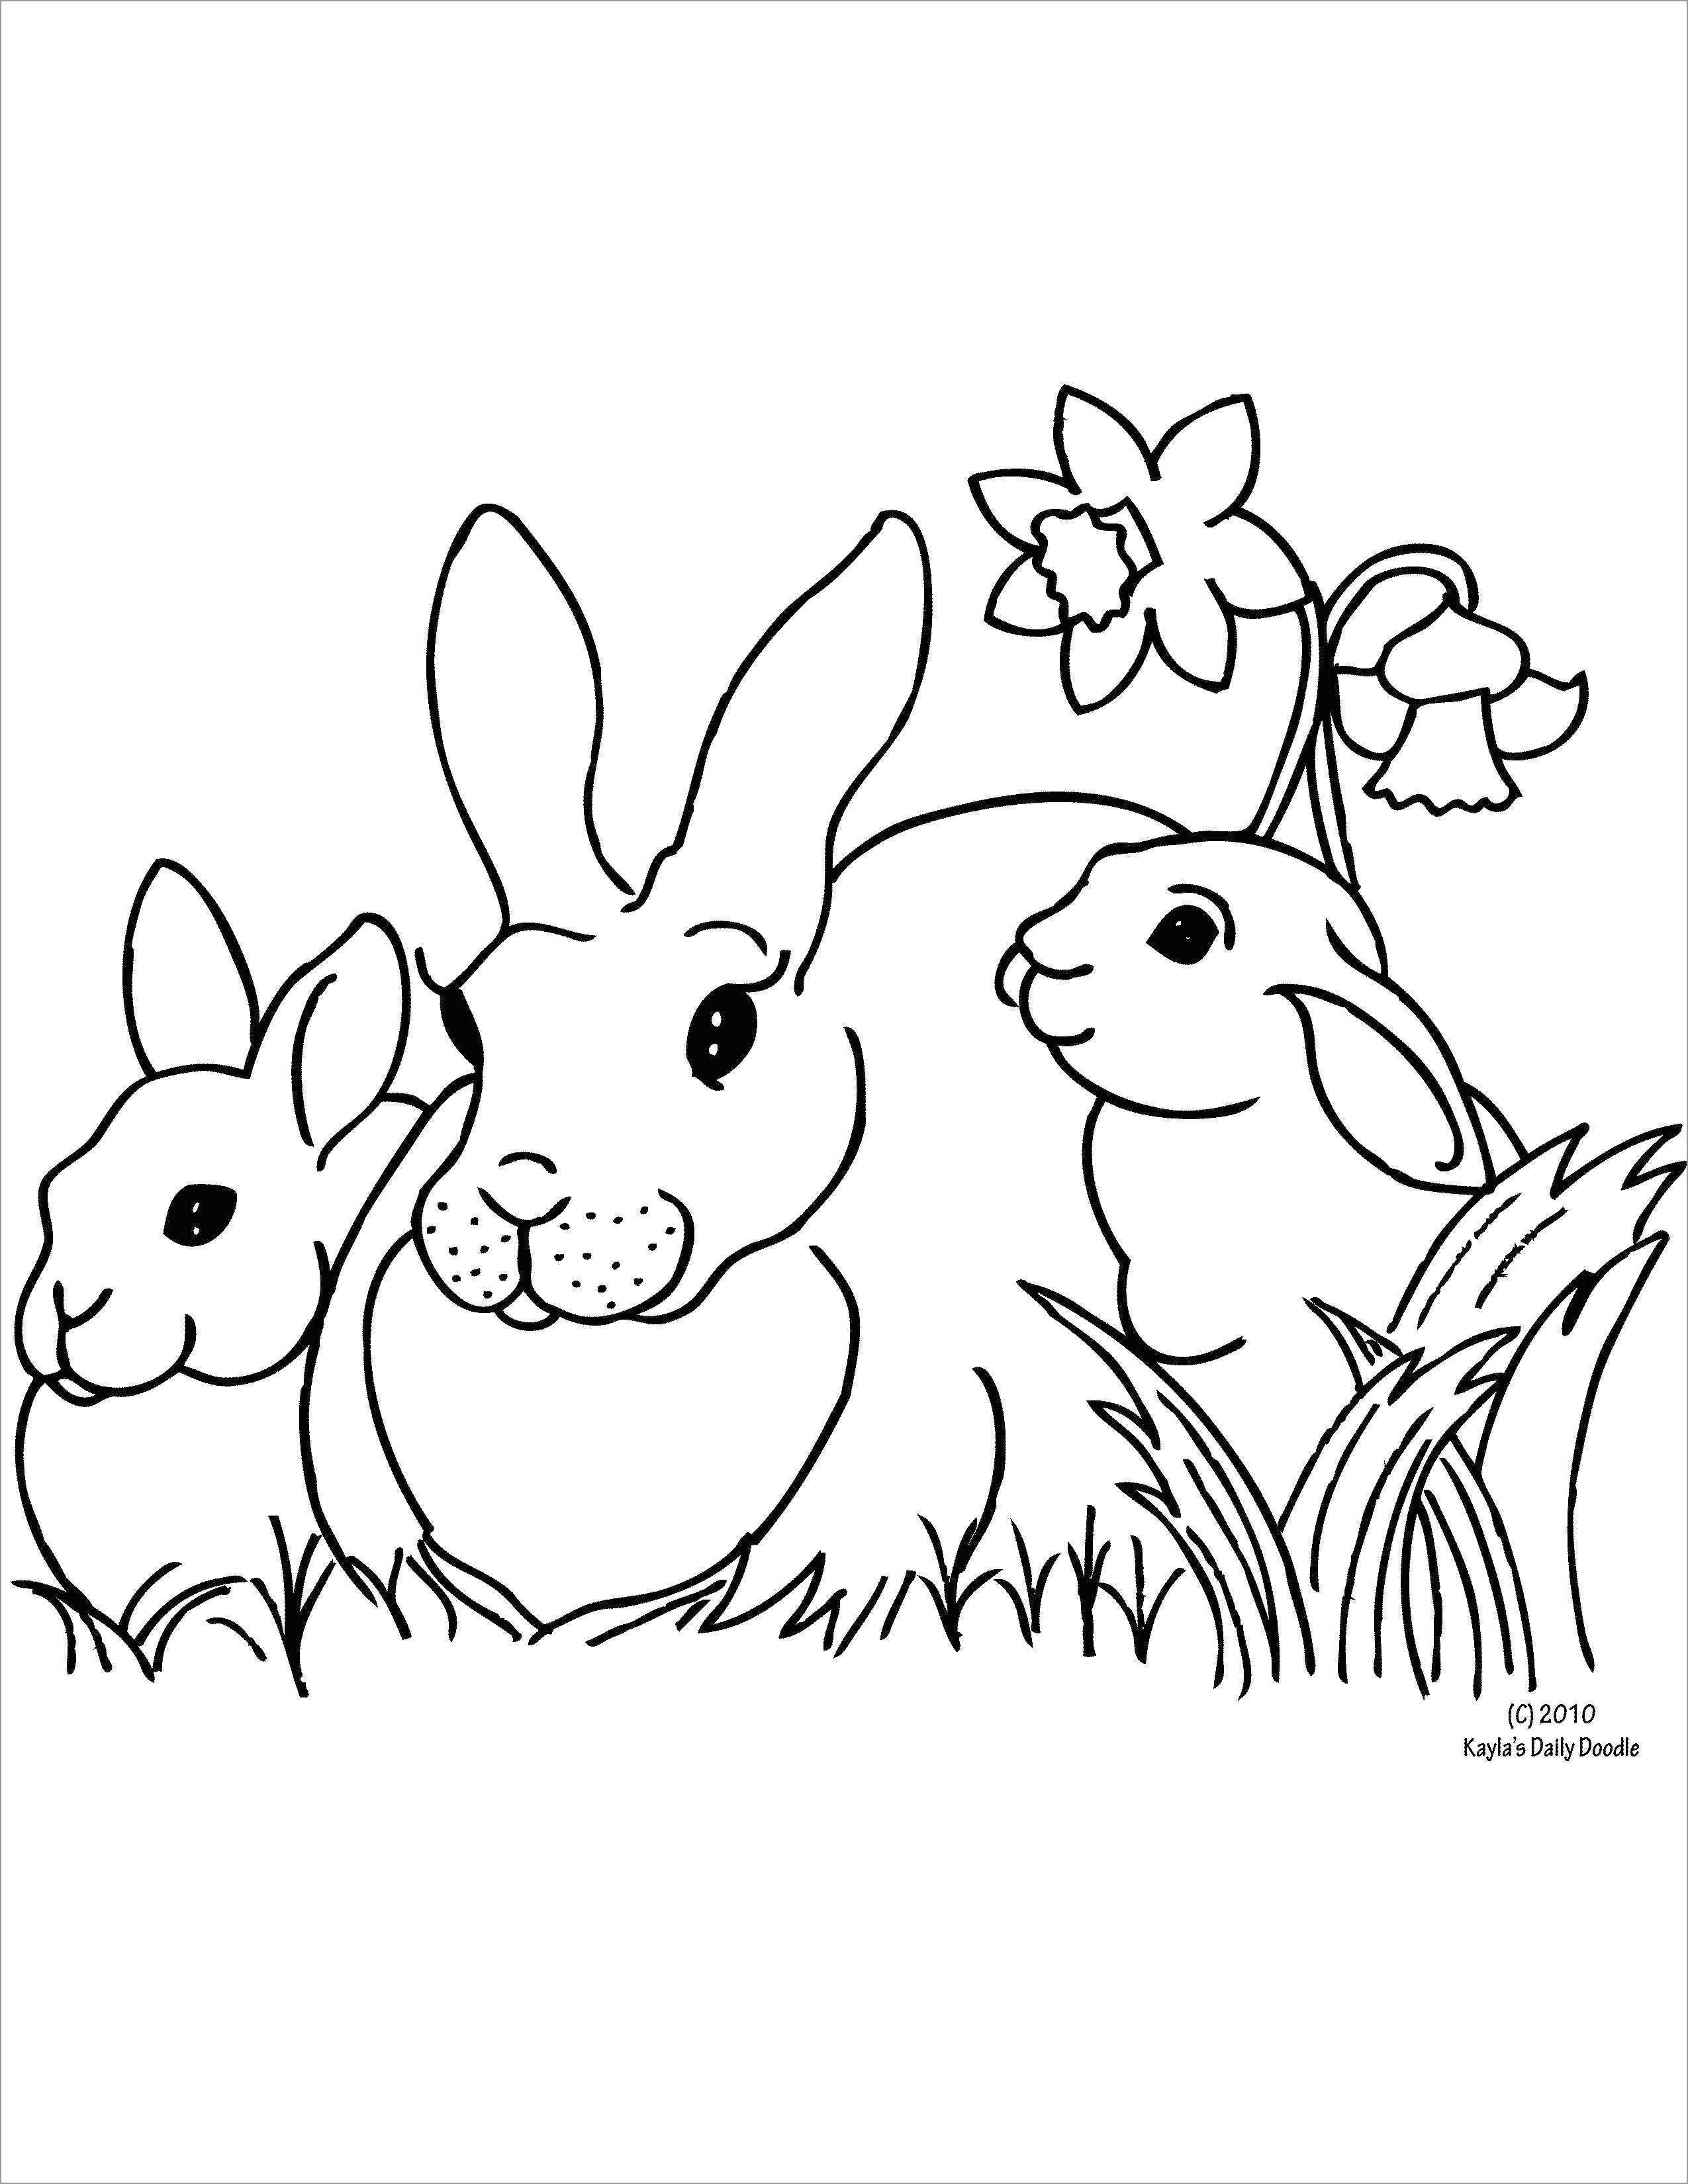 Rabbit Family Coloring Page